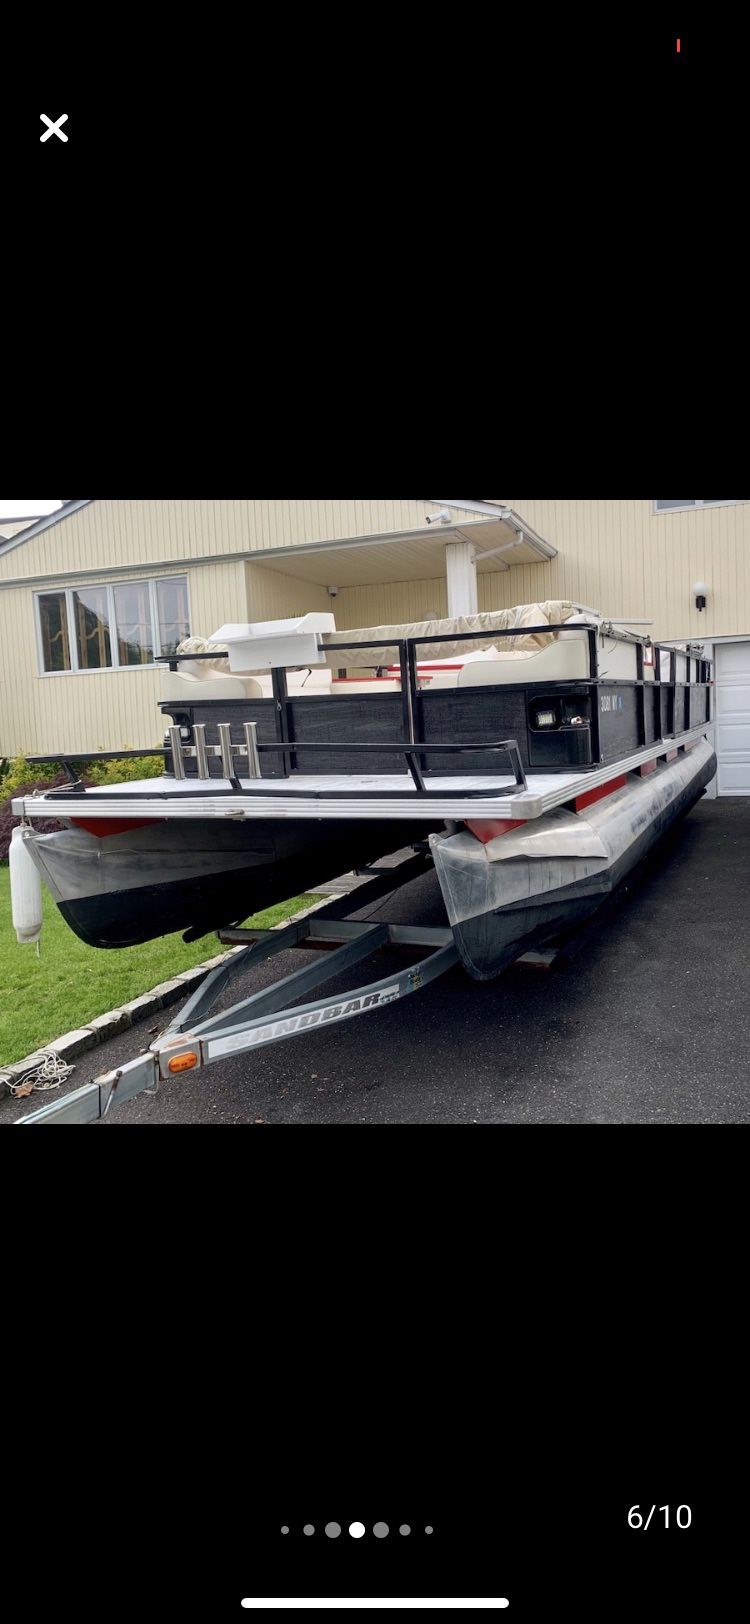 Pontune boat for sale trailer included